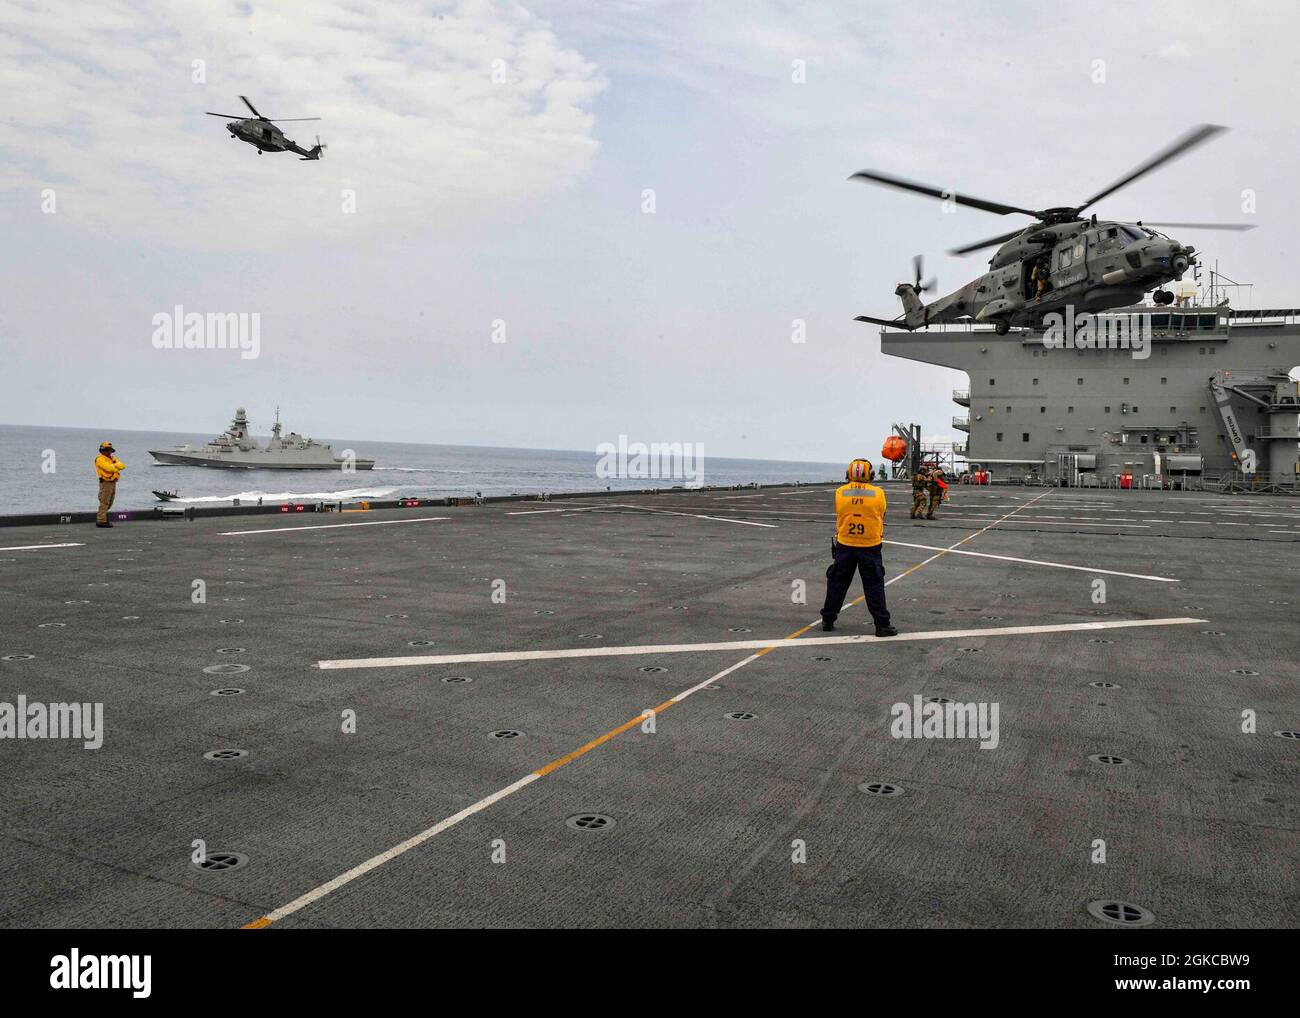 ATLANTIC OCEAN (Mar. 11, 2021) Two EH101 Merlin helicopters from the Italian Navy practice Visit, Board, Search and Seizure operations on board the Expeditionary Sea Base USS Hershel “Woody” Williams (ESB 4) in the Atlantic Ocean, Mar. 11, 2021. Hershel “Woody” Williams is operating in U.S. Sixth Fleet to conduct interoperability training and build strategic partnerships with their African partners. Stock Photo